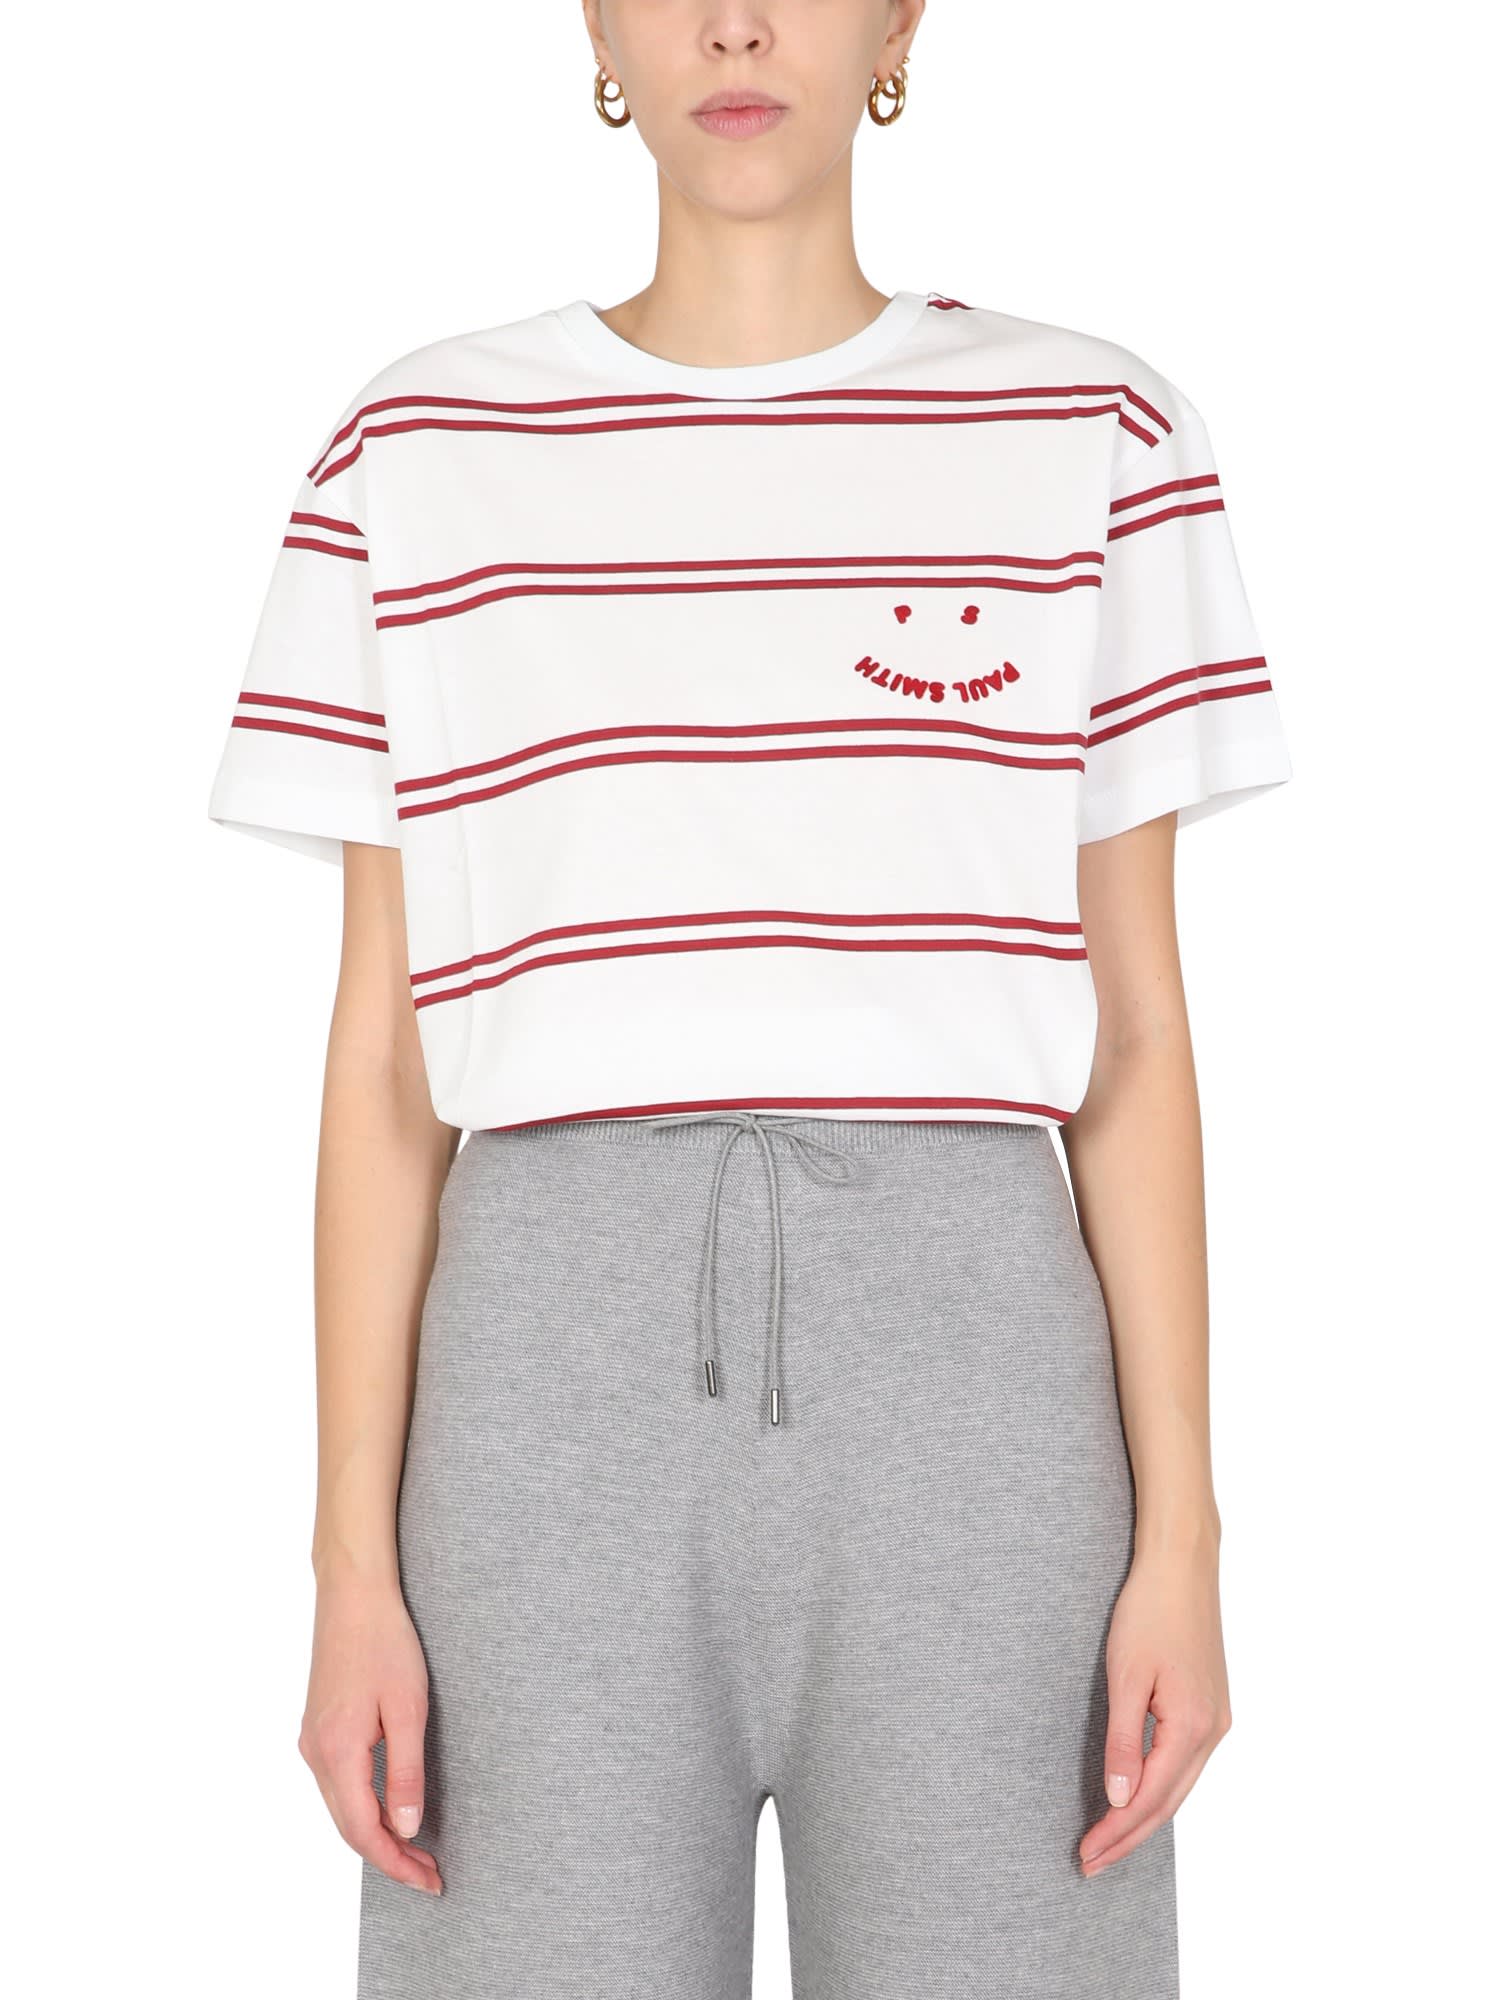 PS by Paul Smith Ps Face Print T-shirt